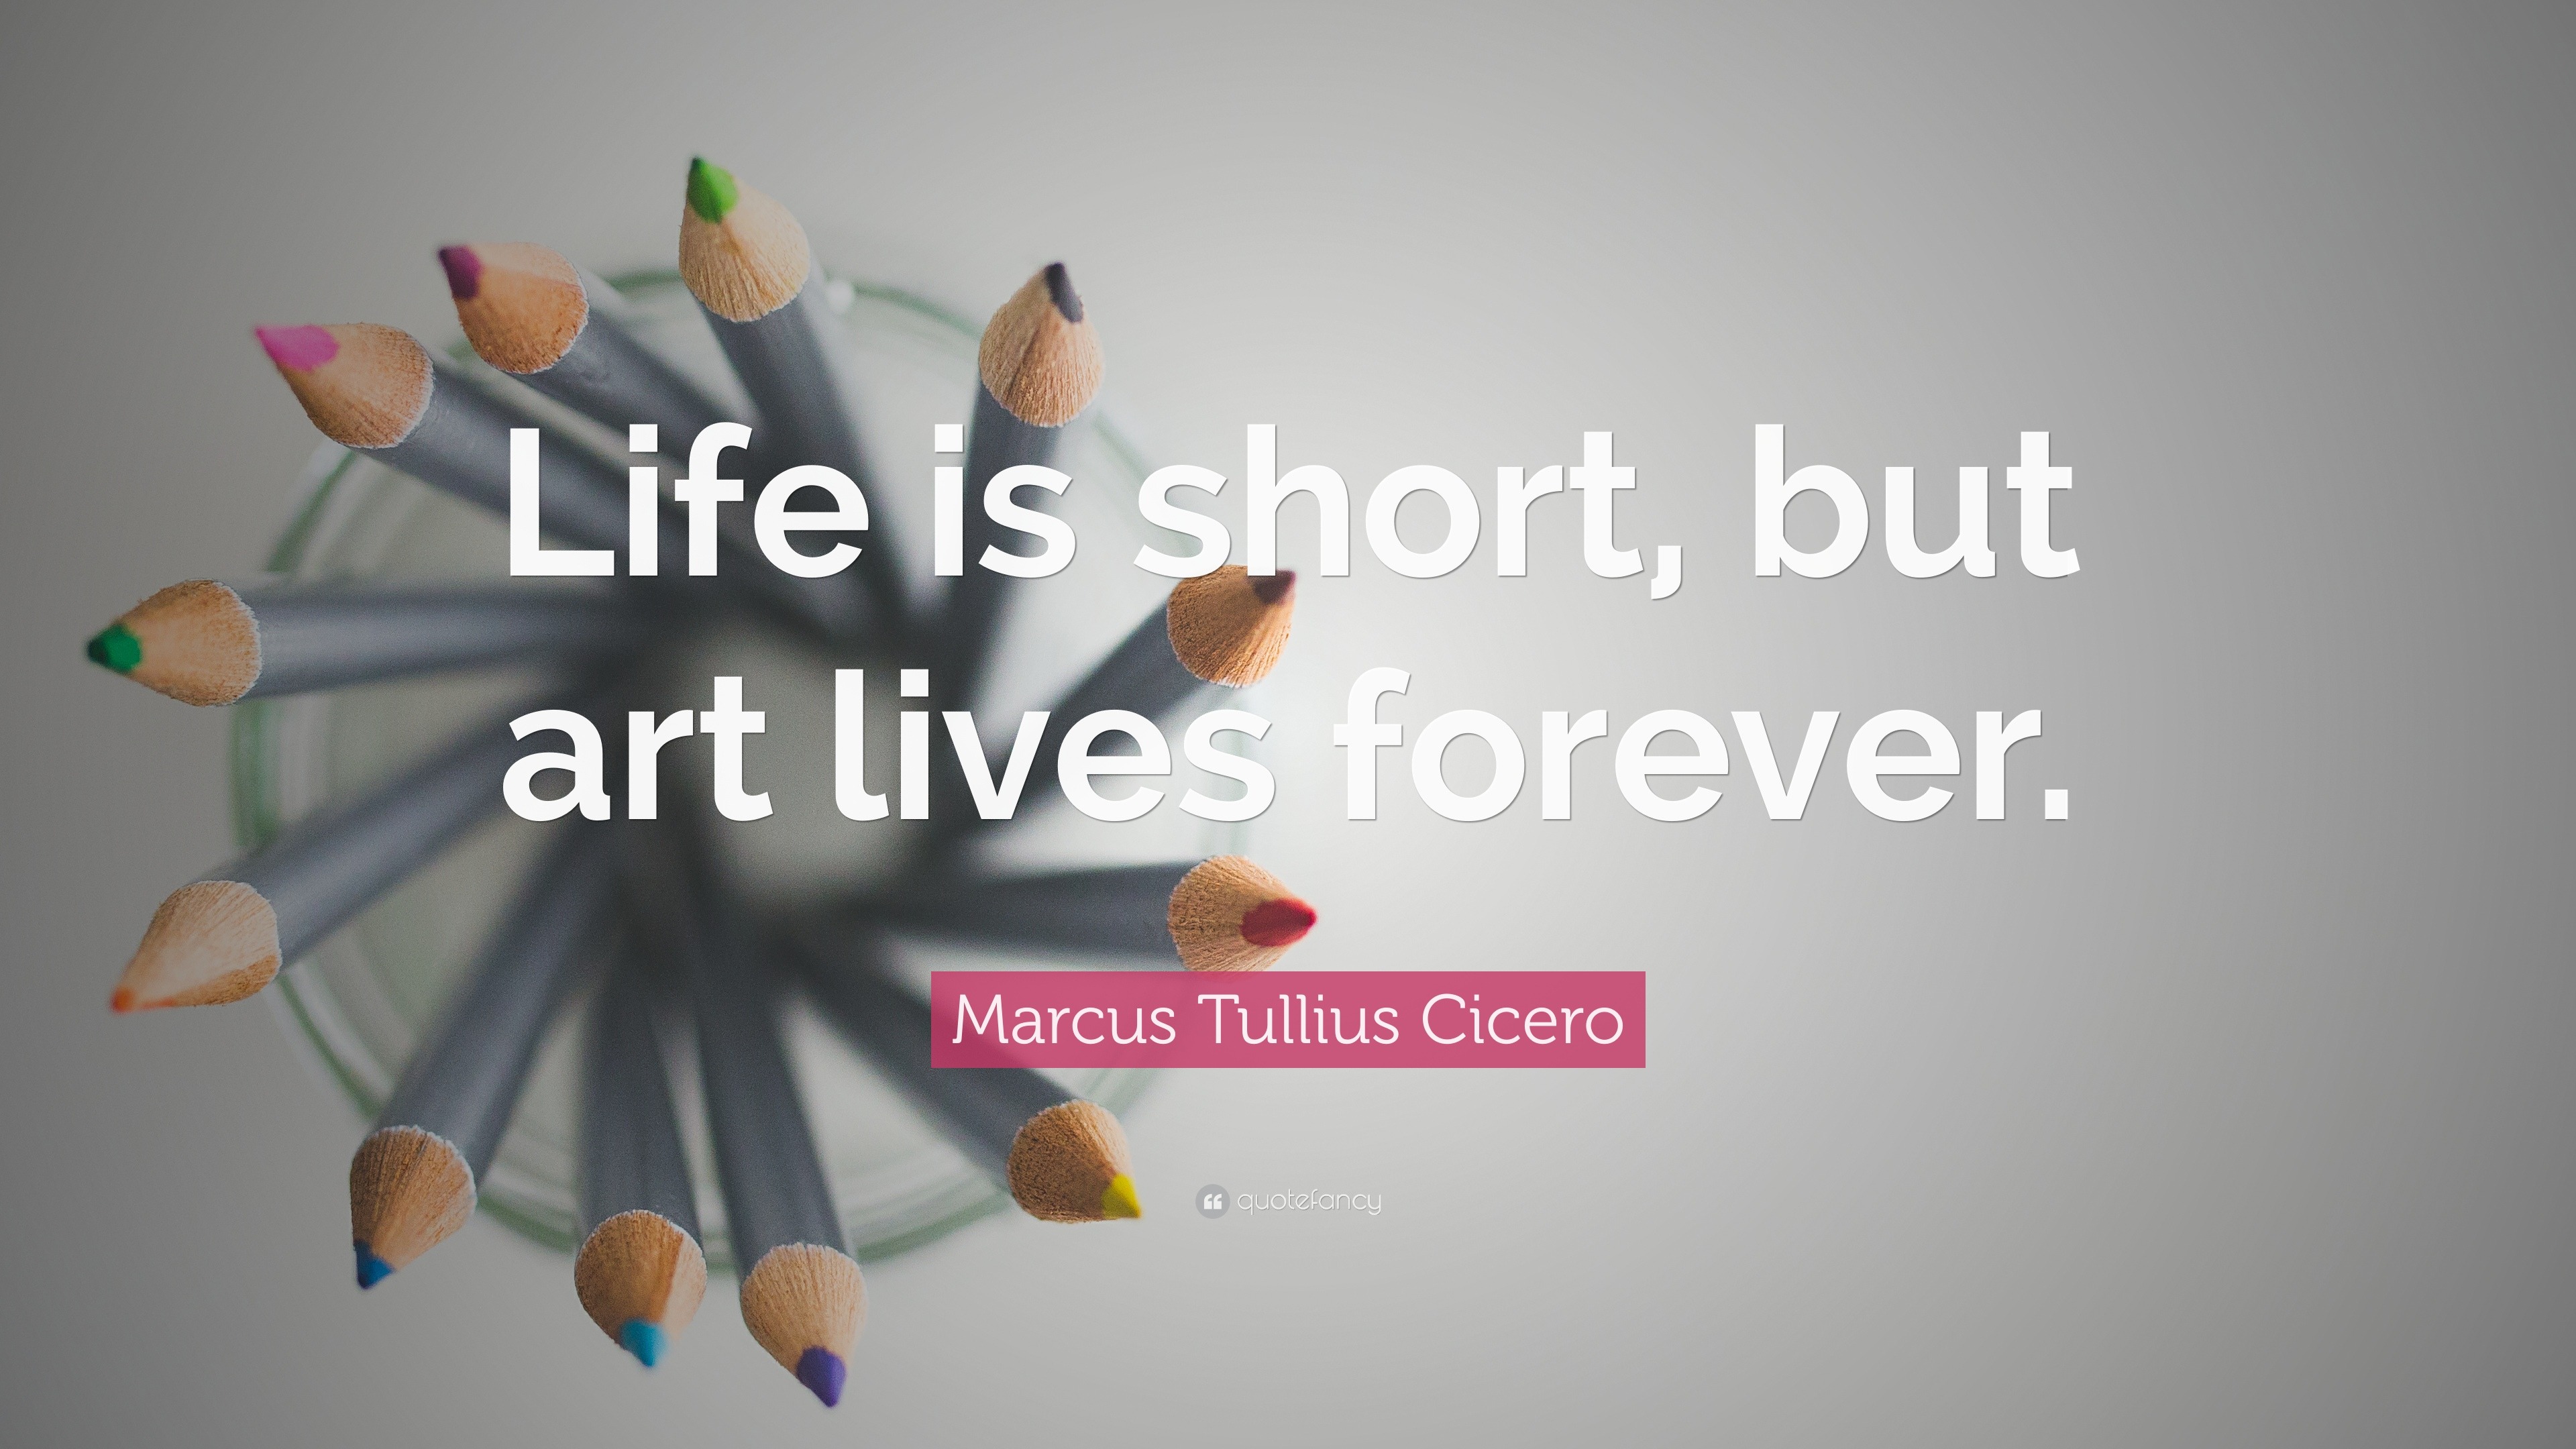 Cicero Quote: “Life is short, art lives forever.”